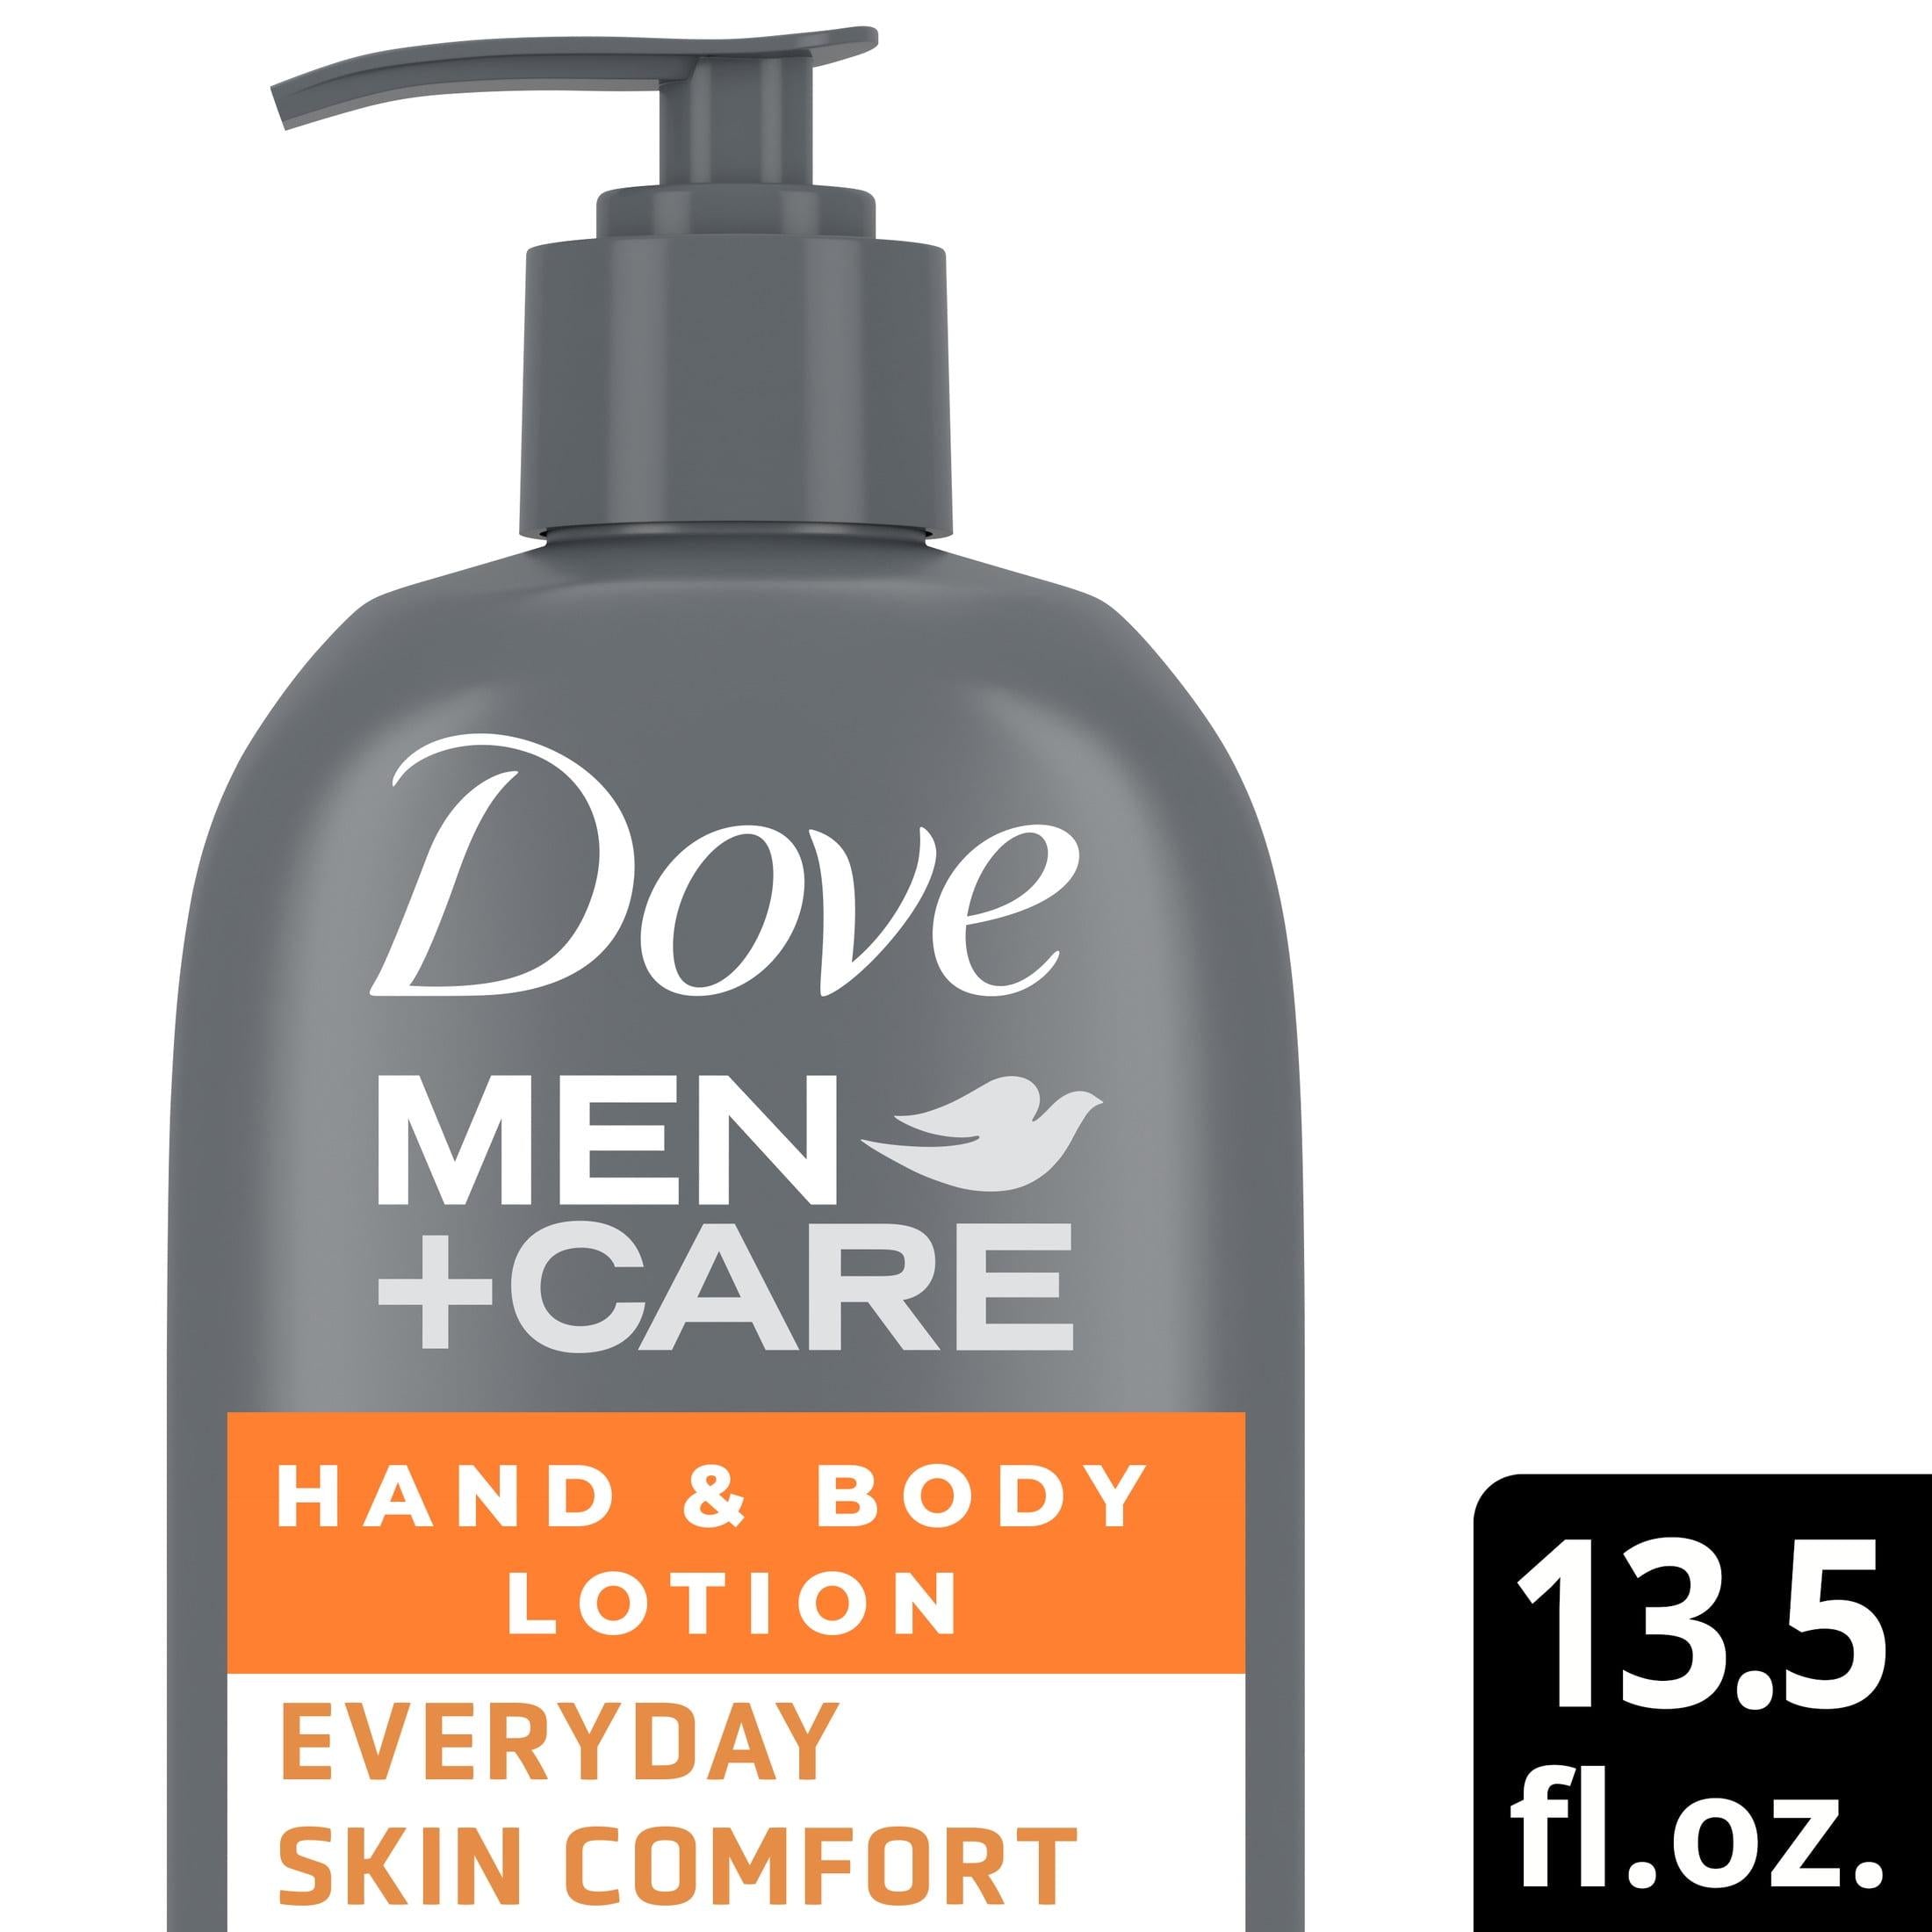 Dove Men+Care Everyday Skin Comfort Non Greasy Hand and Body Lotion for Dry Skin, Light, 13.5 fl oz | MTTS418